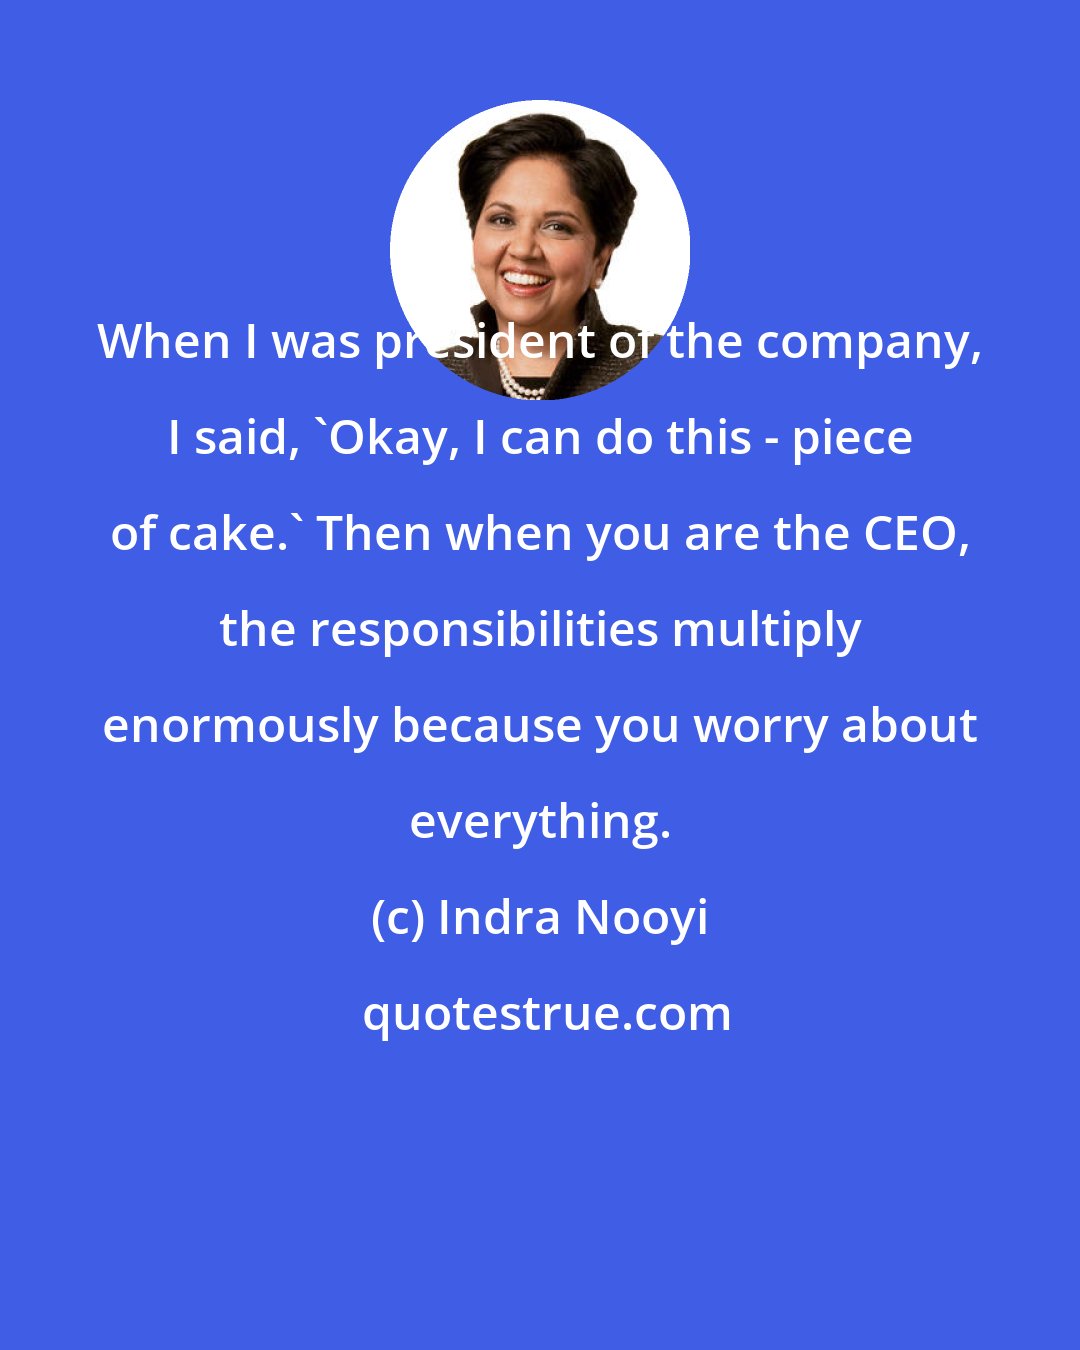 Indra Nooyi: When I was president of the company, I said, 'Okay, I can do this - piece of cake.' Then when you are the CEO, the responsibilities multiply enormously because you worry about everything.